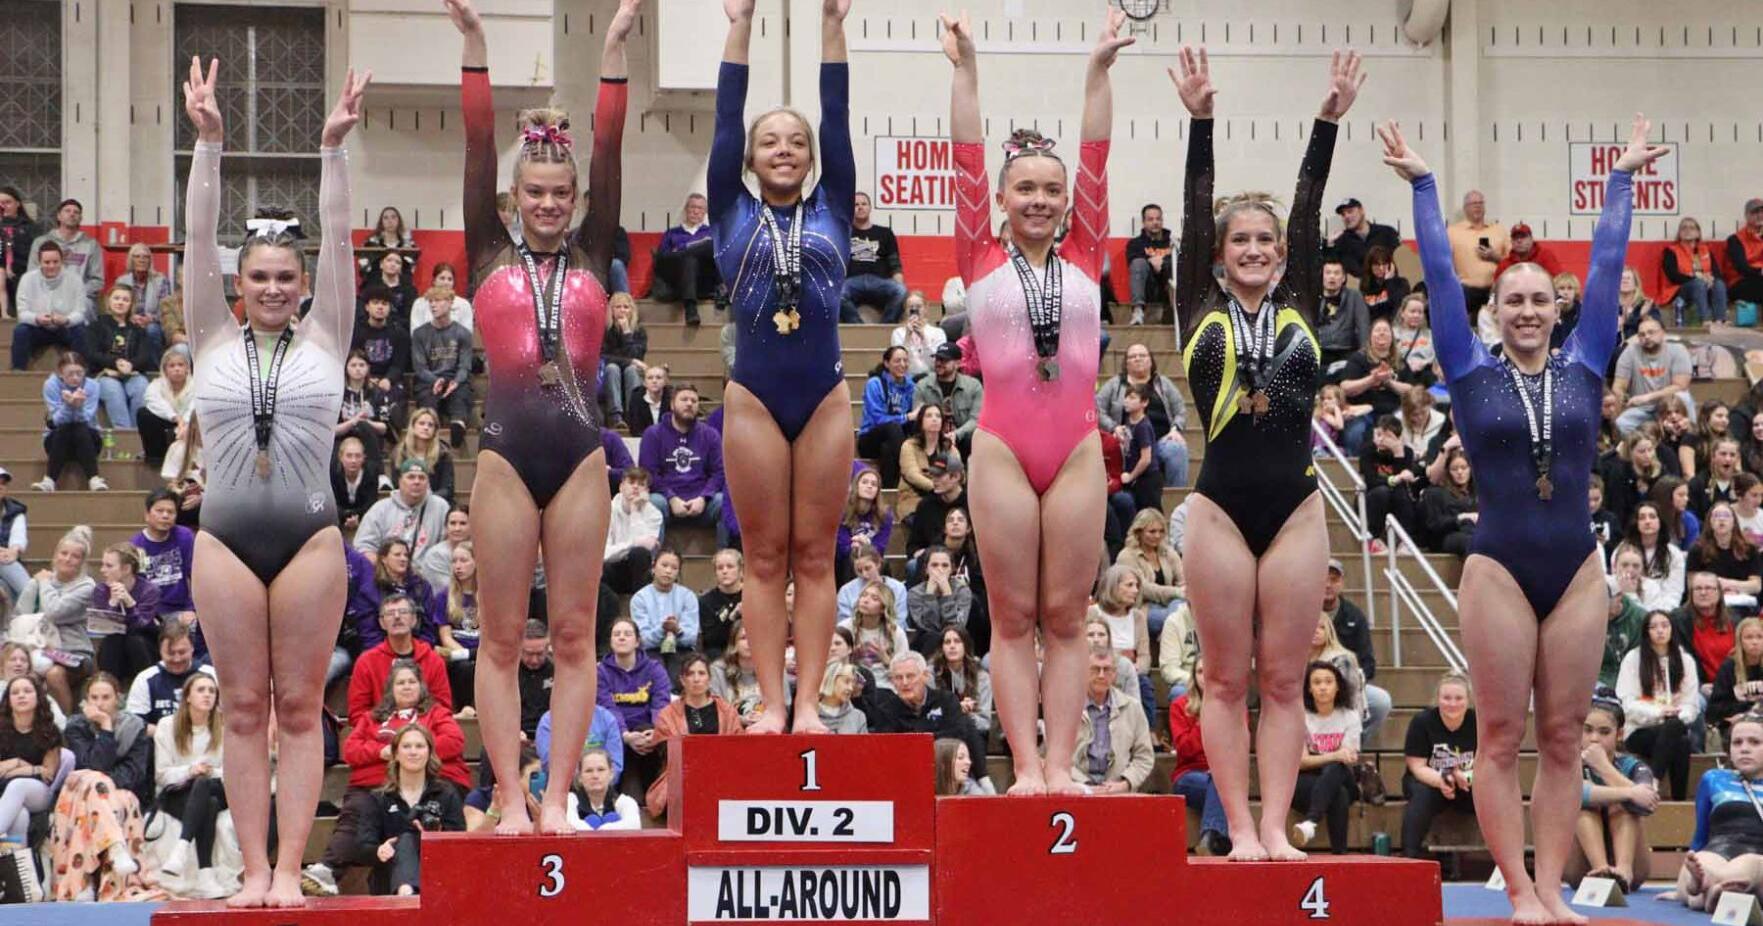 Gymnastics: Rice Lake's Ash sets beam record, repeats on vault to win Division 2 all-around state title